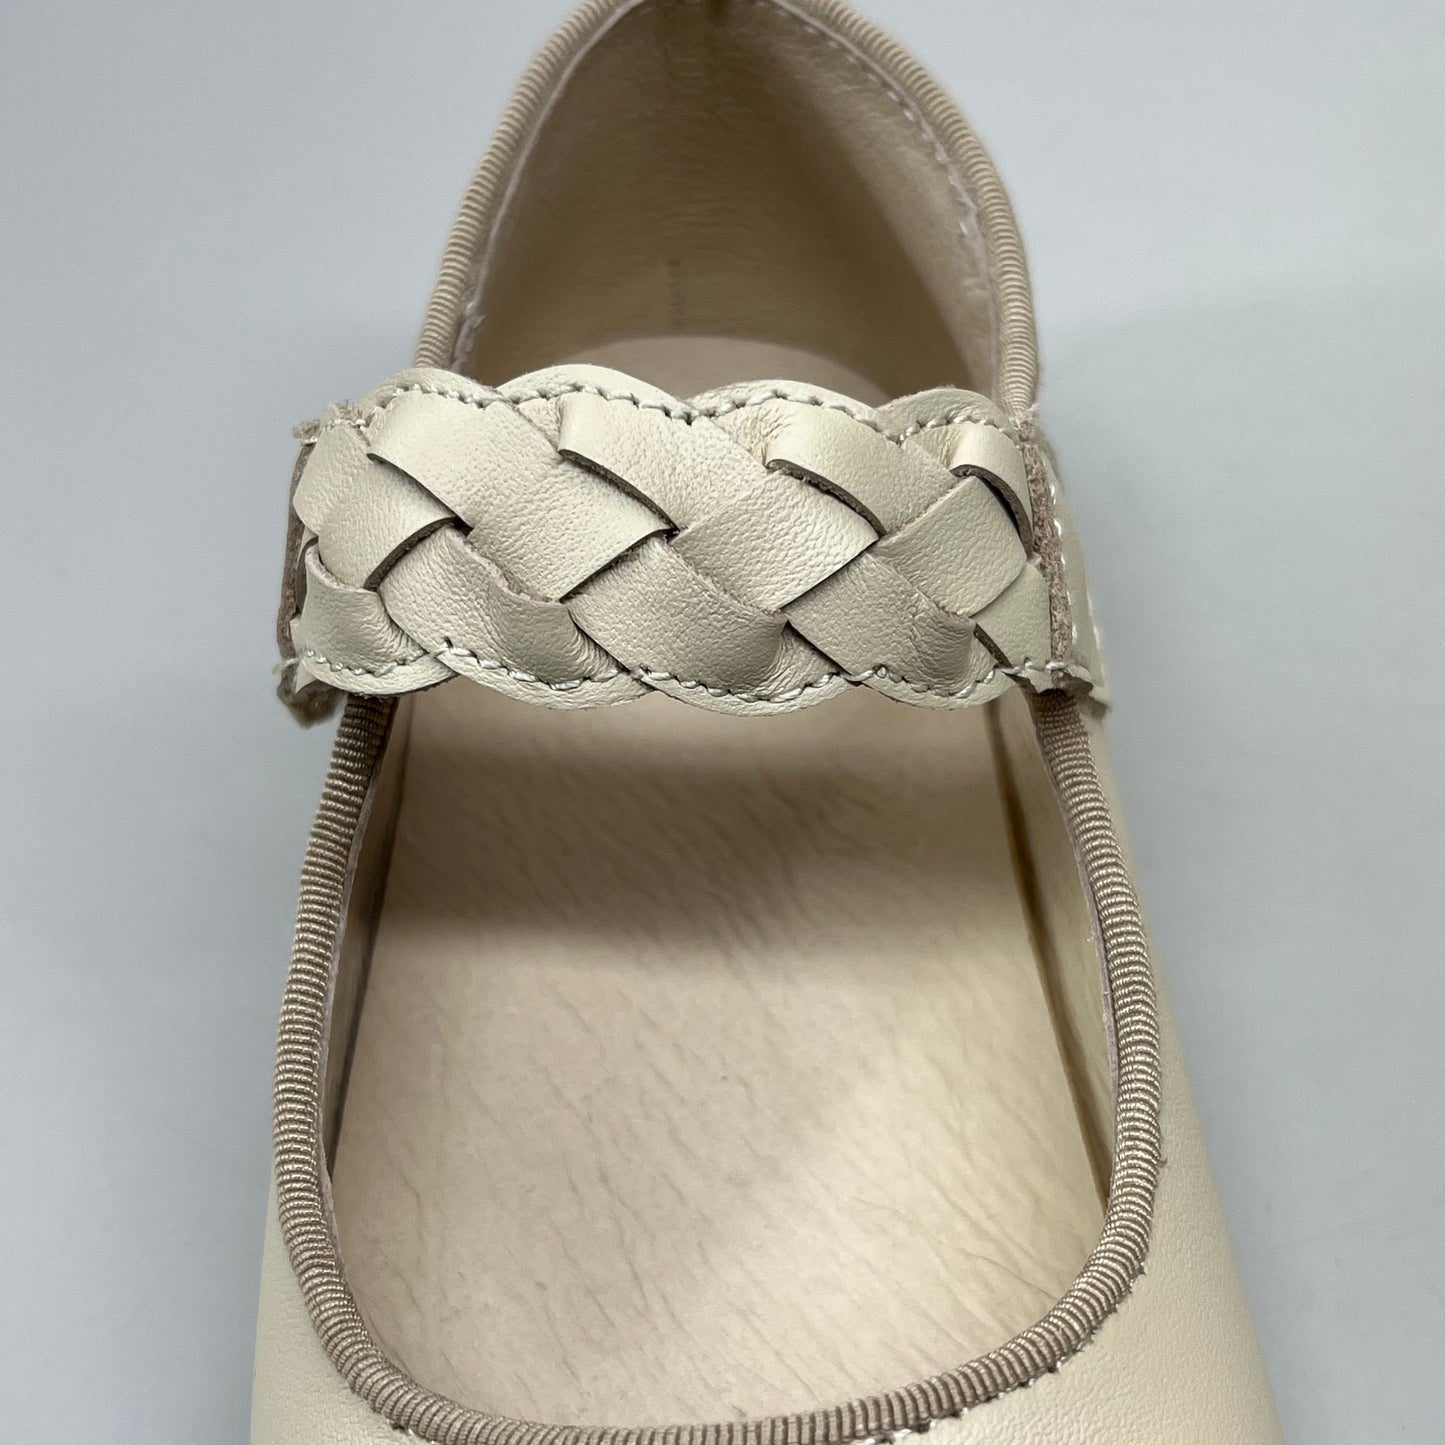 OLD SOLES Lady Plat Braided Strap Leather Shoe Kid’s Sz 27 US 10 Cream #817